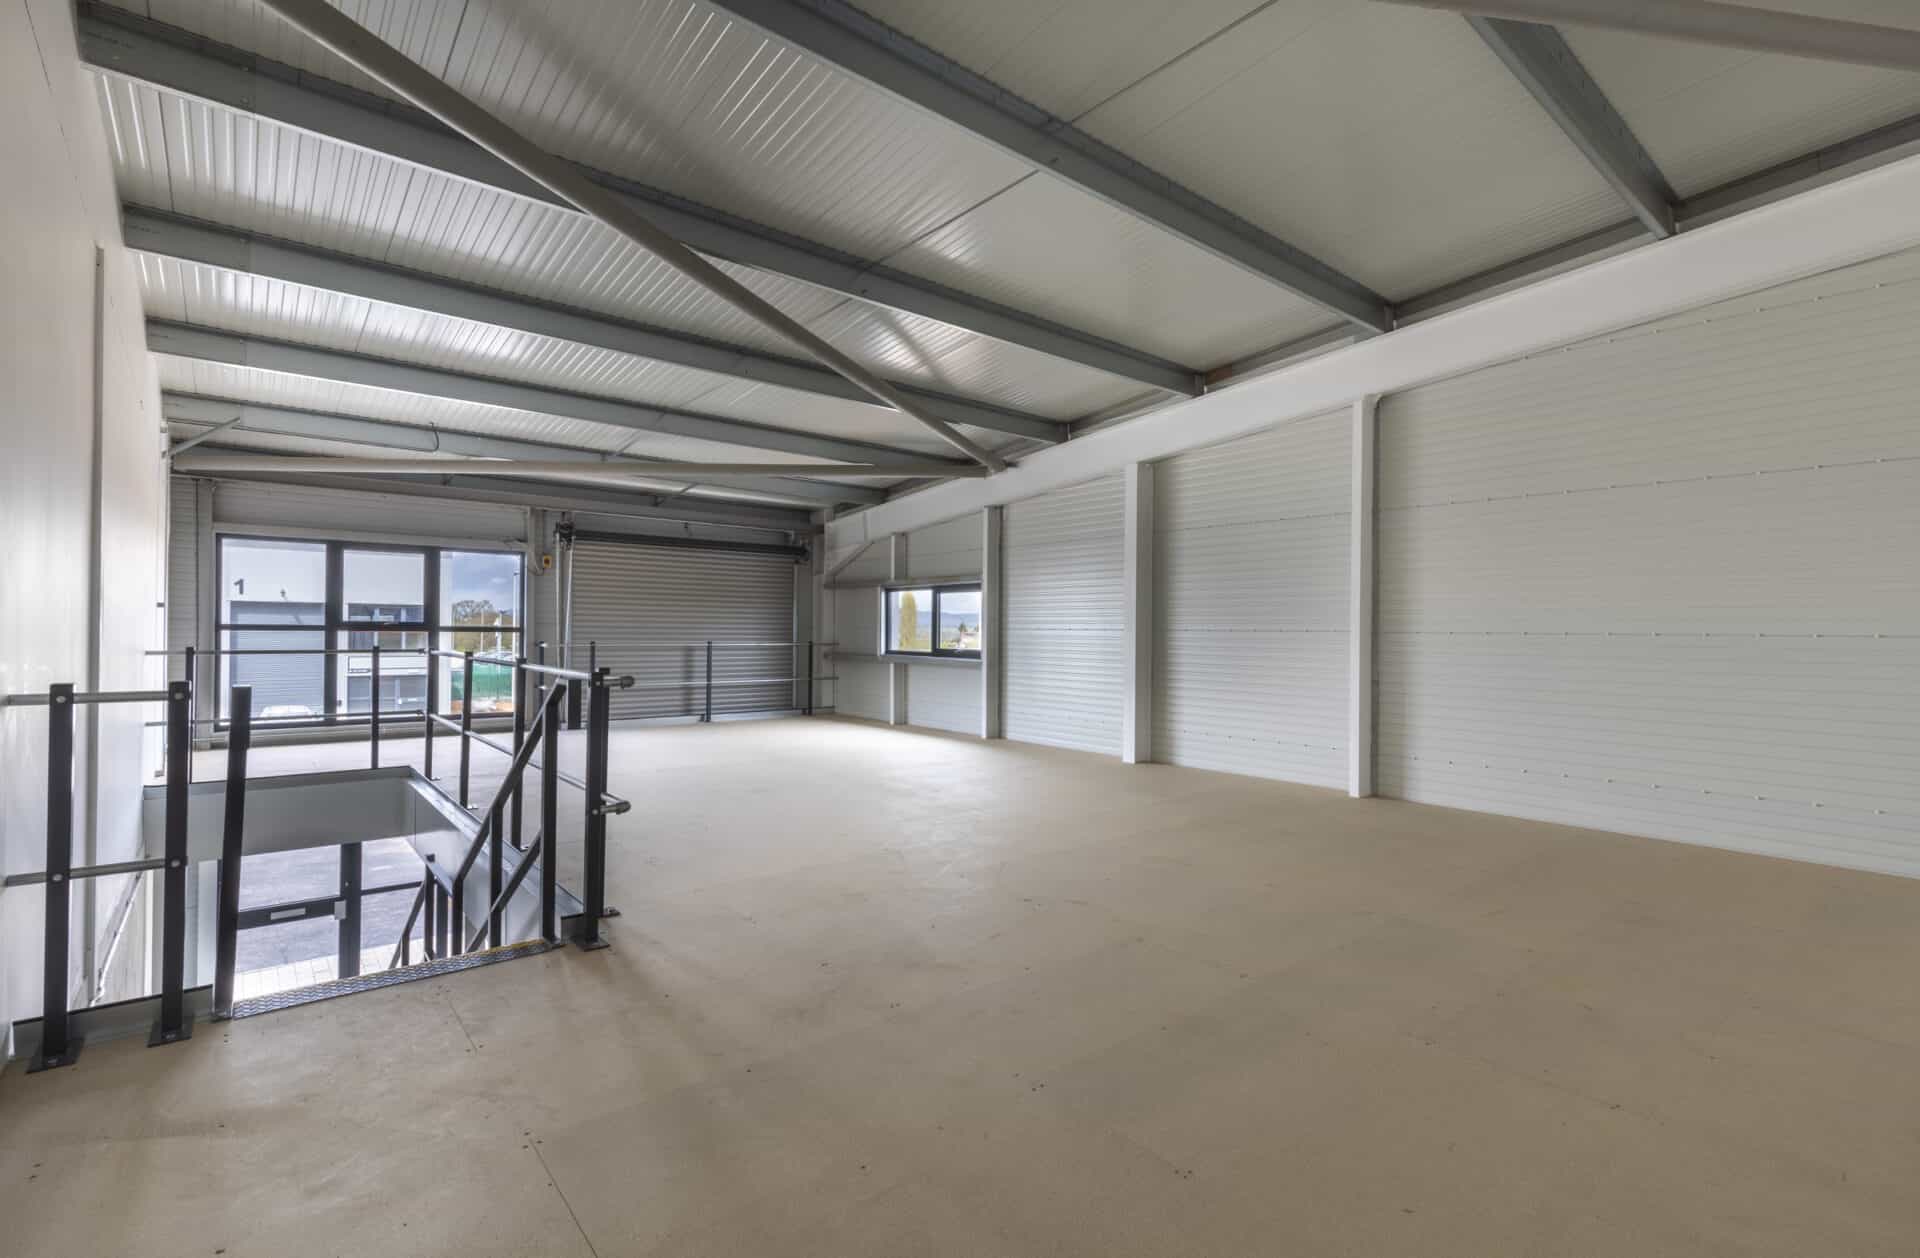 Interior view of a light industrial unit with a full mezzanine layout, offering flexibility for client-specific adaptations.